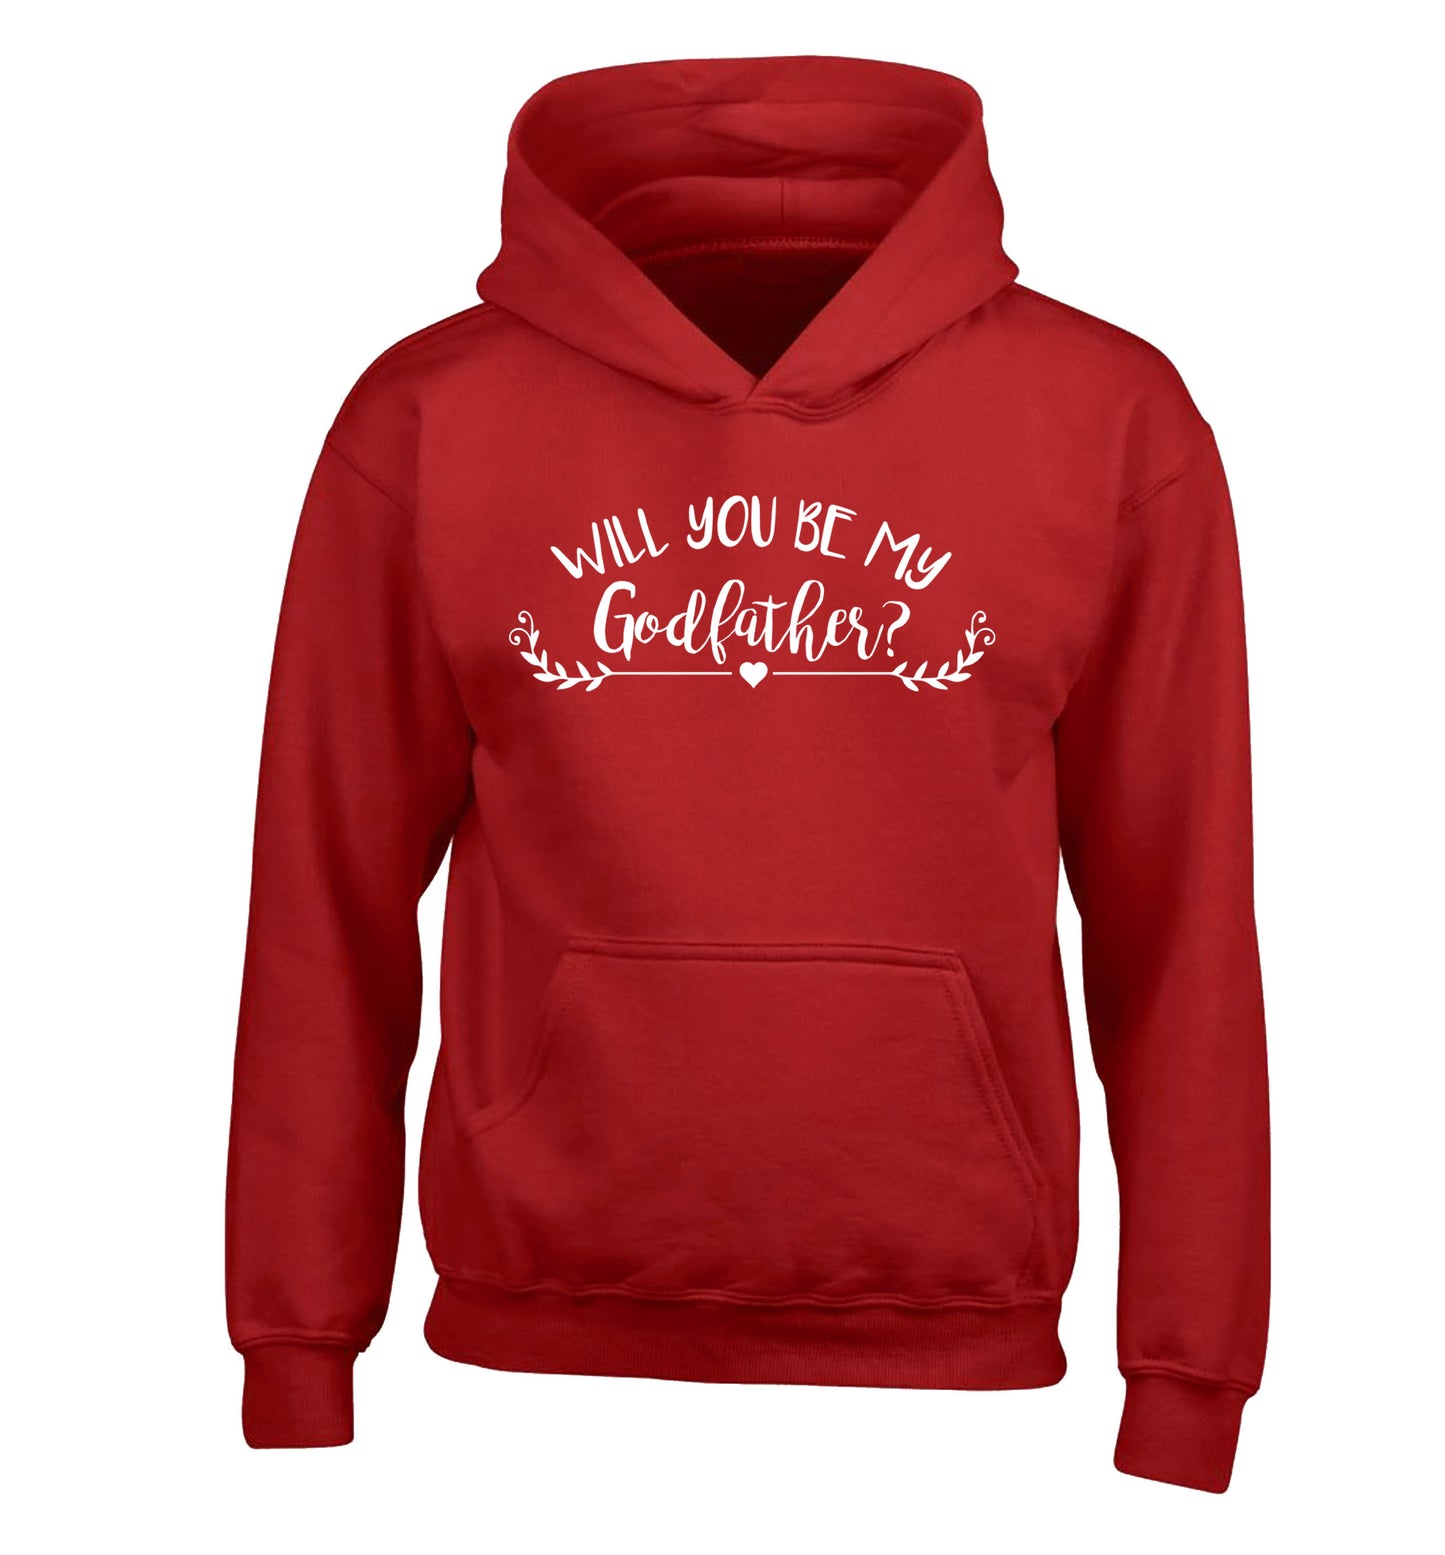 Will you be my godfather? children's red hoodie 12-14 Years